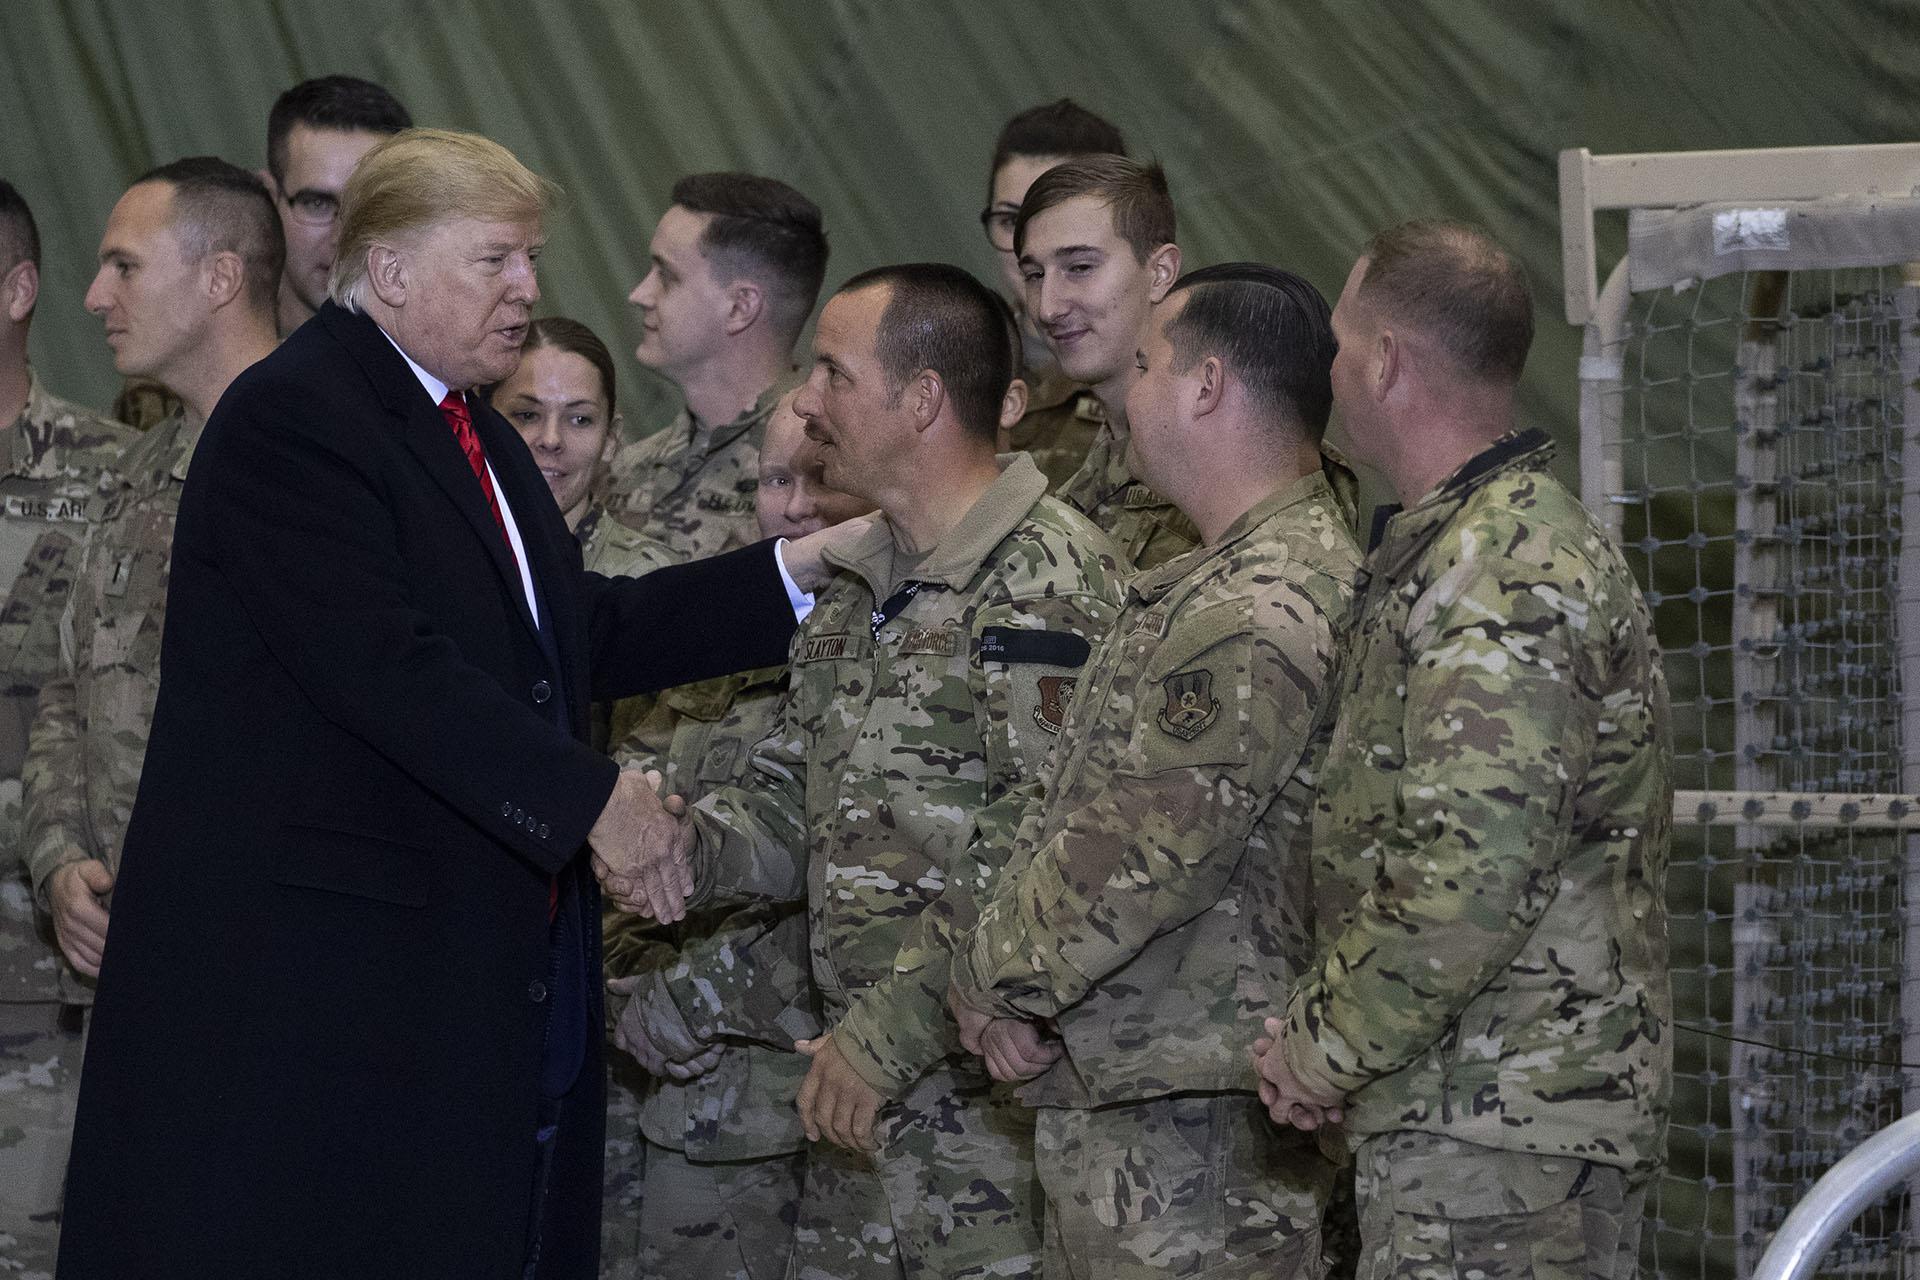 President Donald Trump greeting members of the military after speaking to members of the military during a surprise Thanksgiving Day visit, Thursday, Nov. 28, 2019, at Bagram Air Field, Afghanistan. (AP Photo / Alex Brandon)